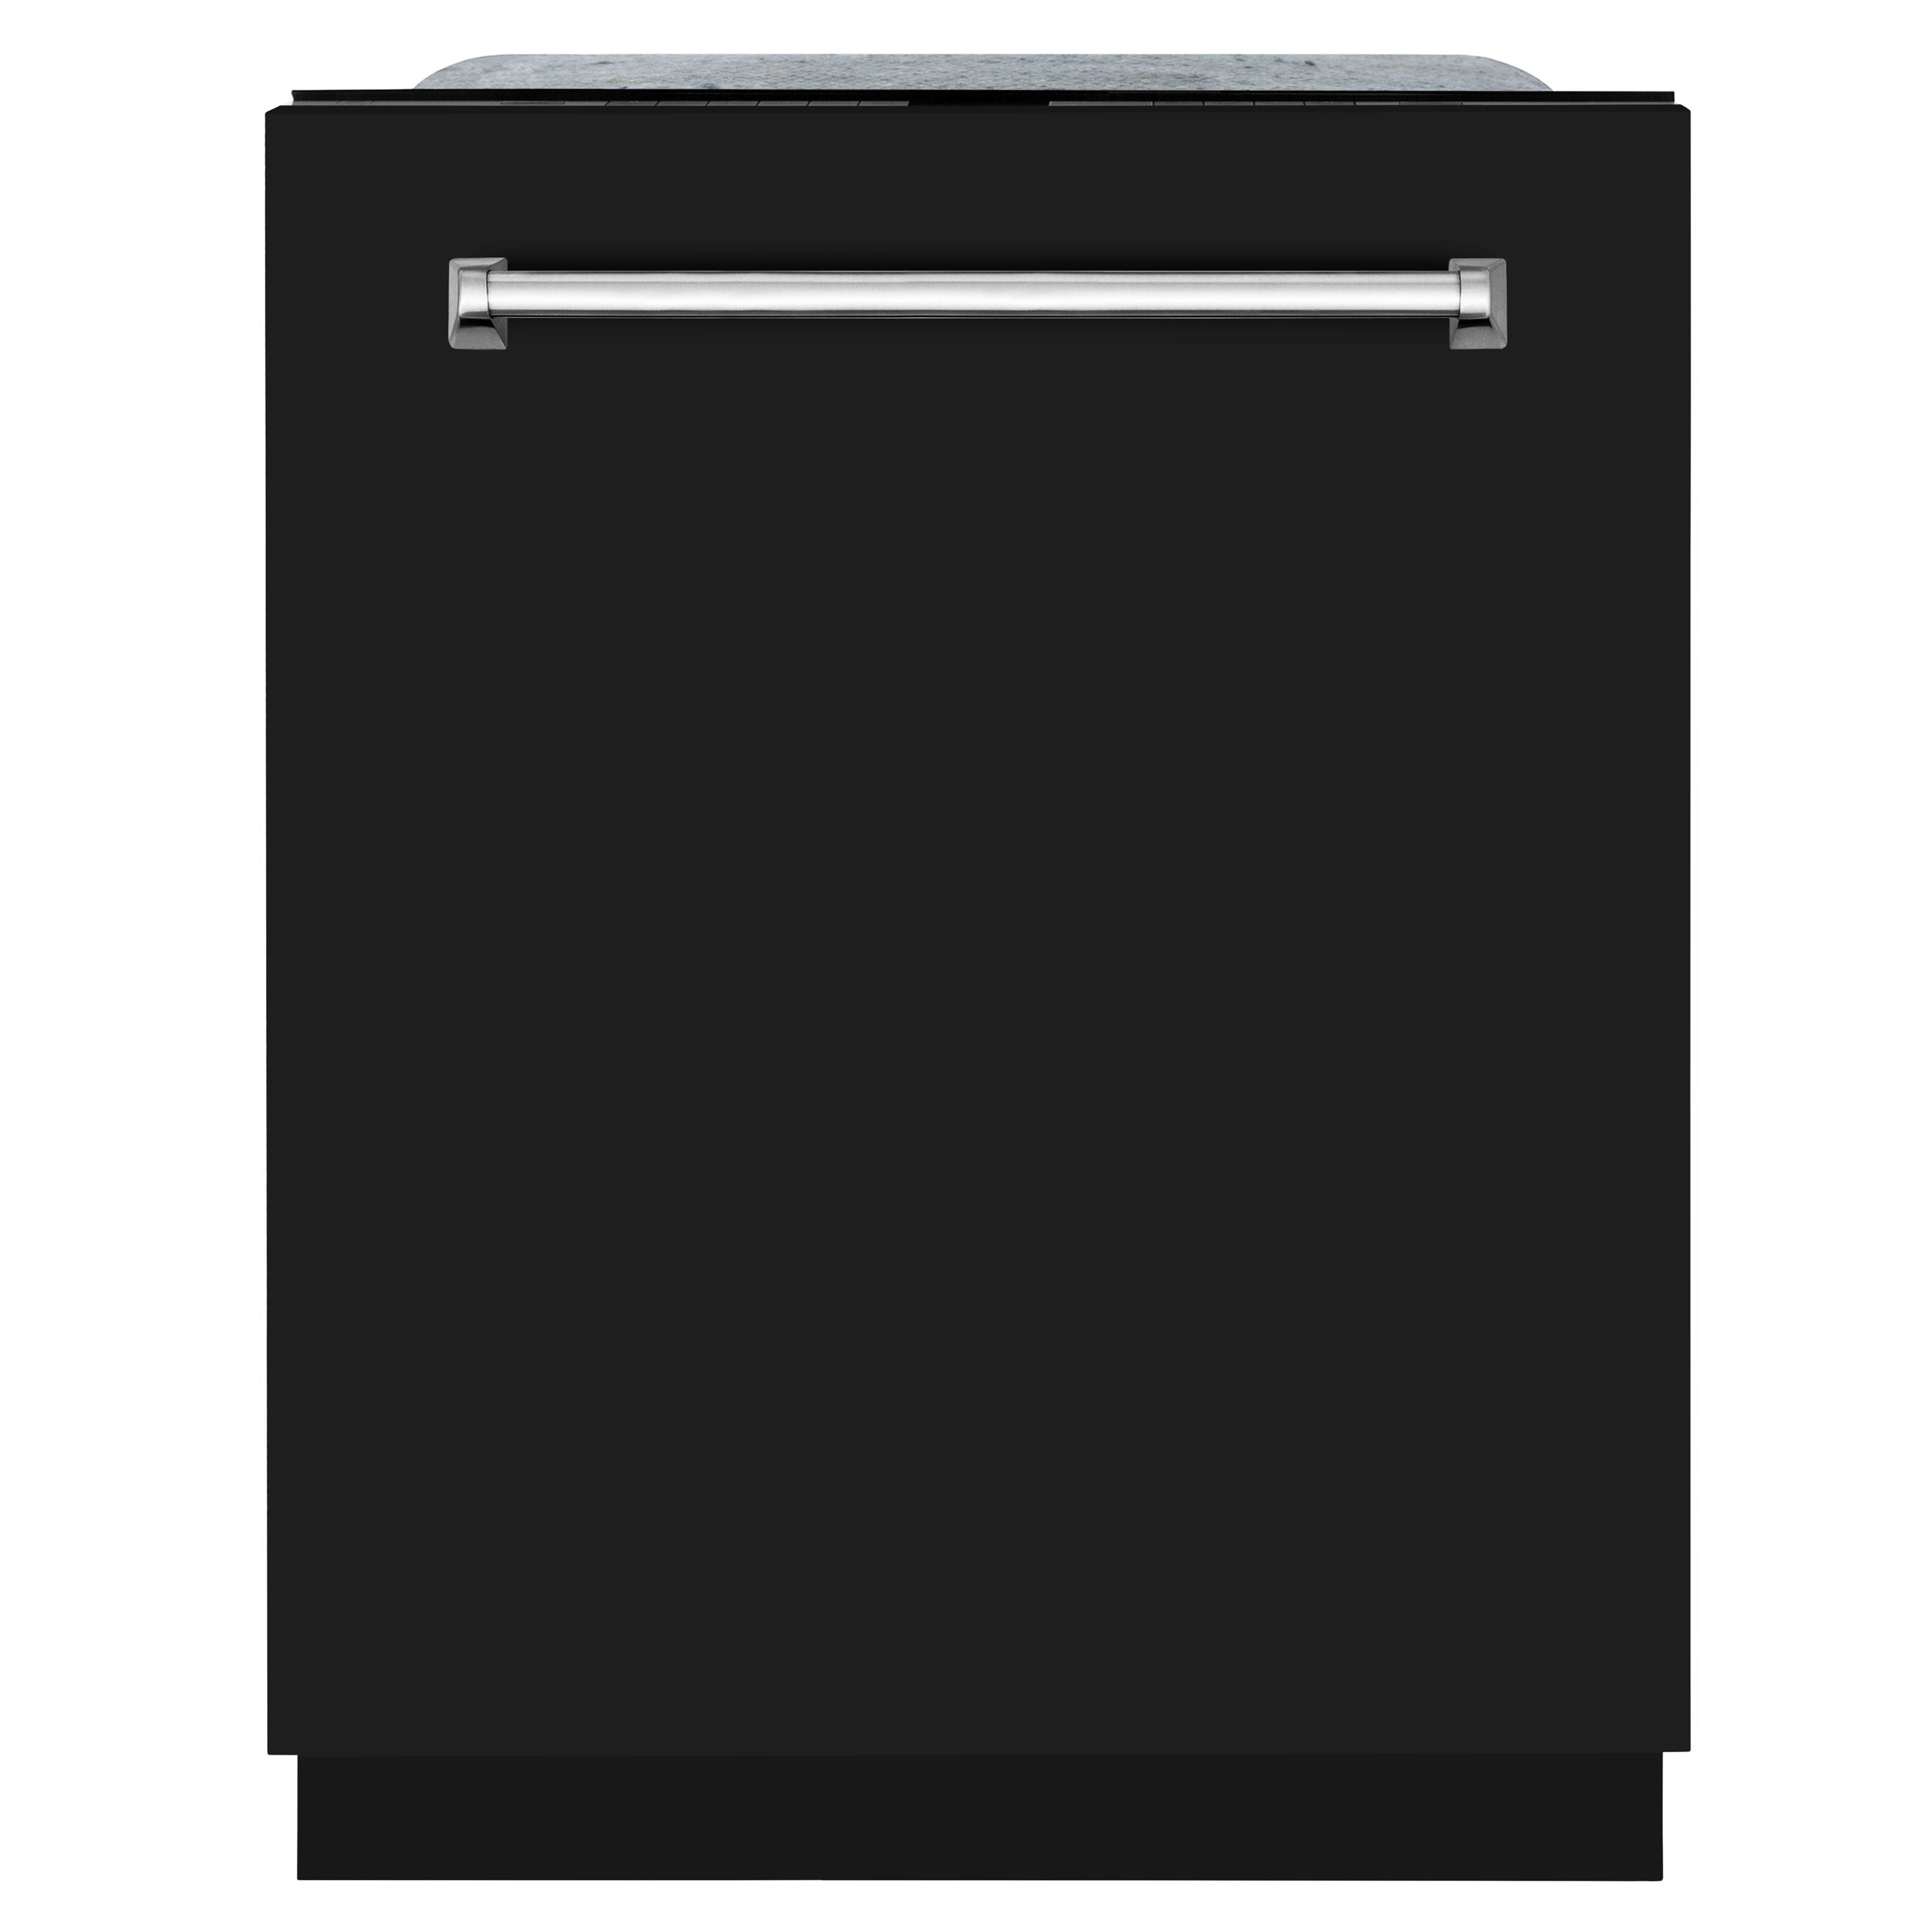 ZLINE 24 In. Monument Series 3rd Rack Top Touch Control Dishwasher in Black Matte, 45dBa 1